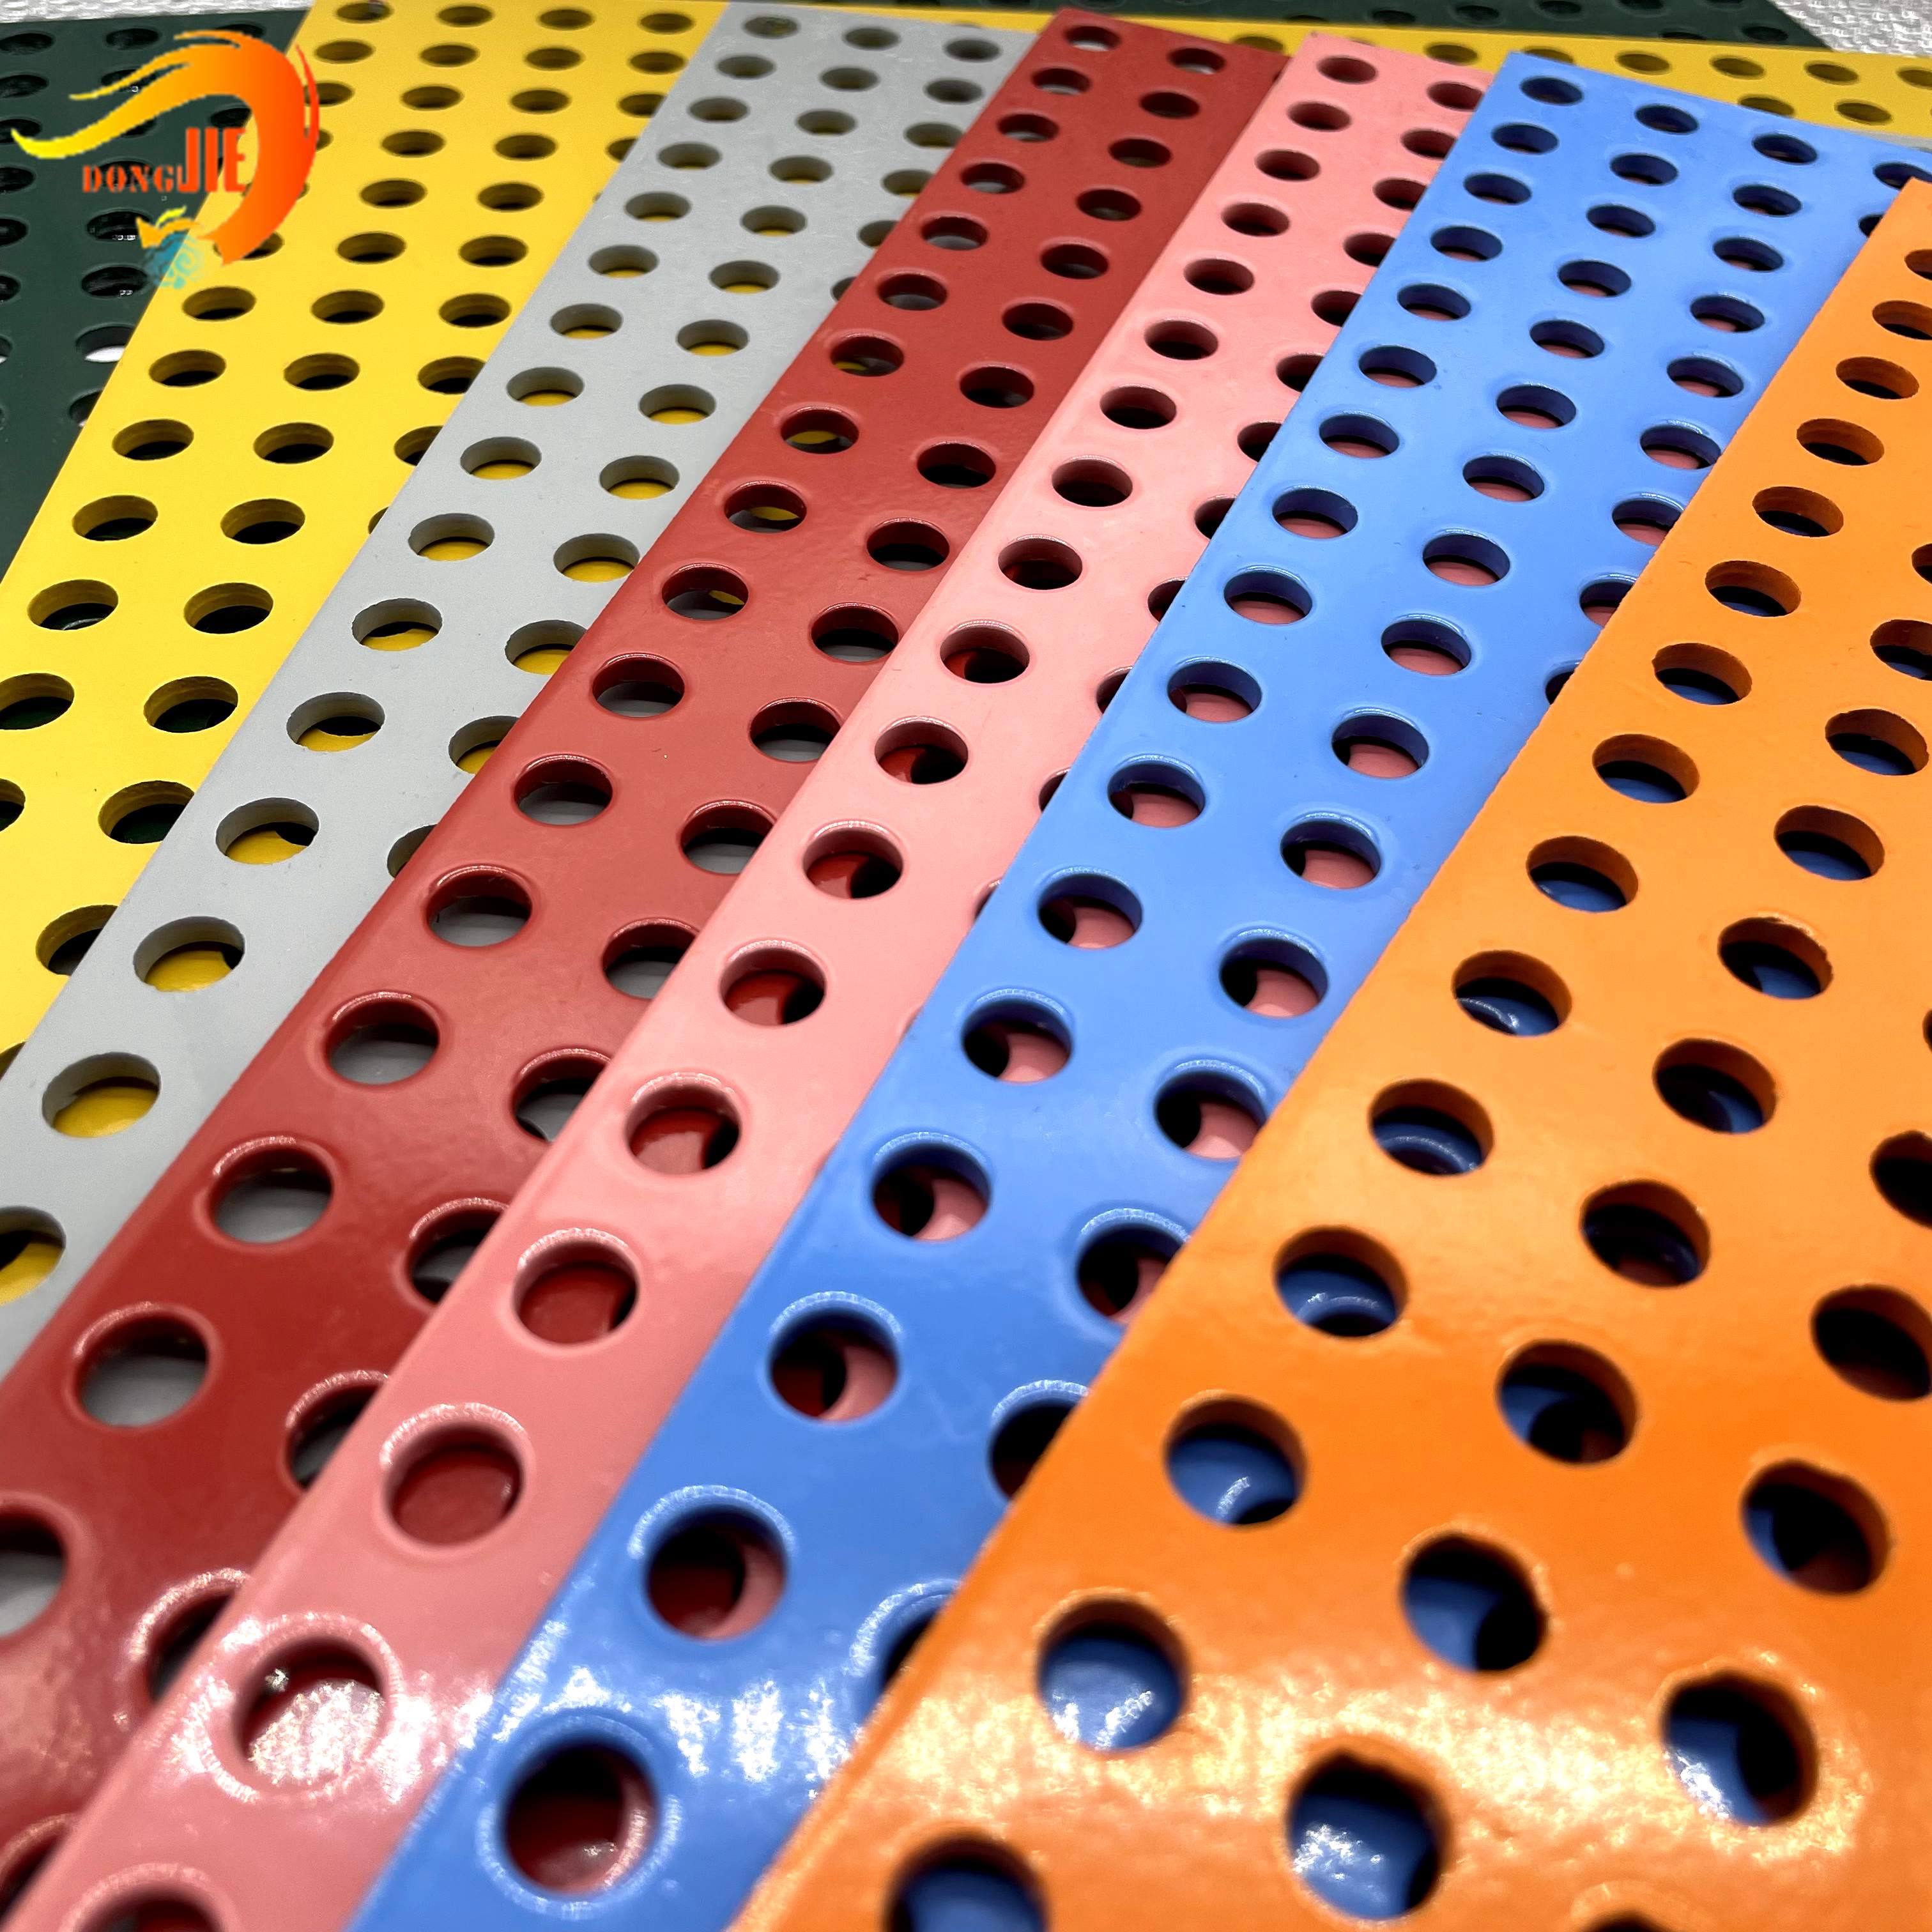 China Plate Perforated, China Perforated Steel, China Perforated Metal, China Perforated Sheet